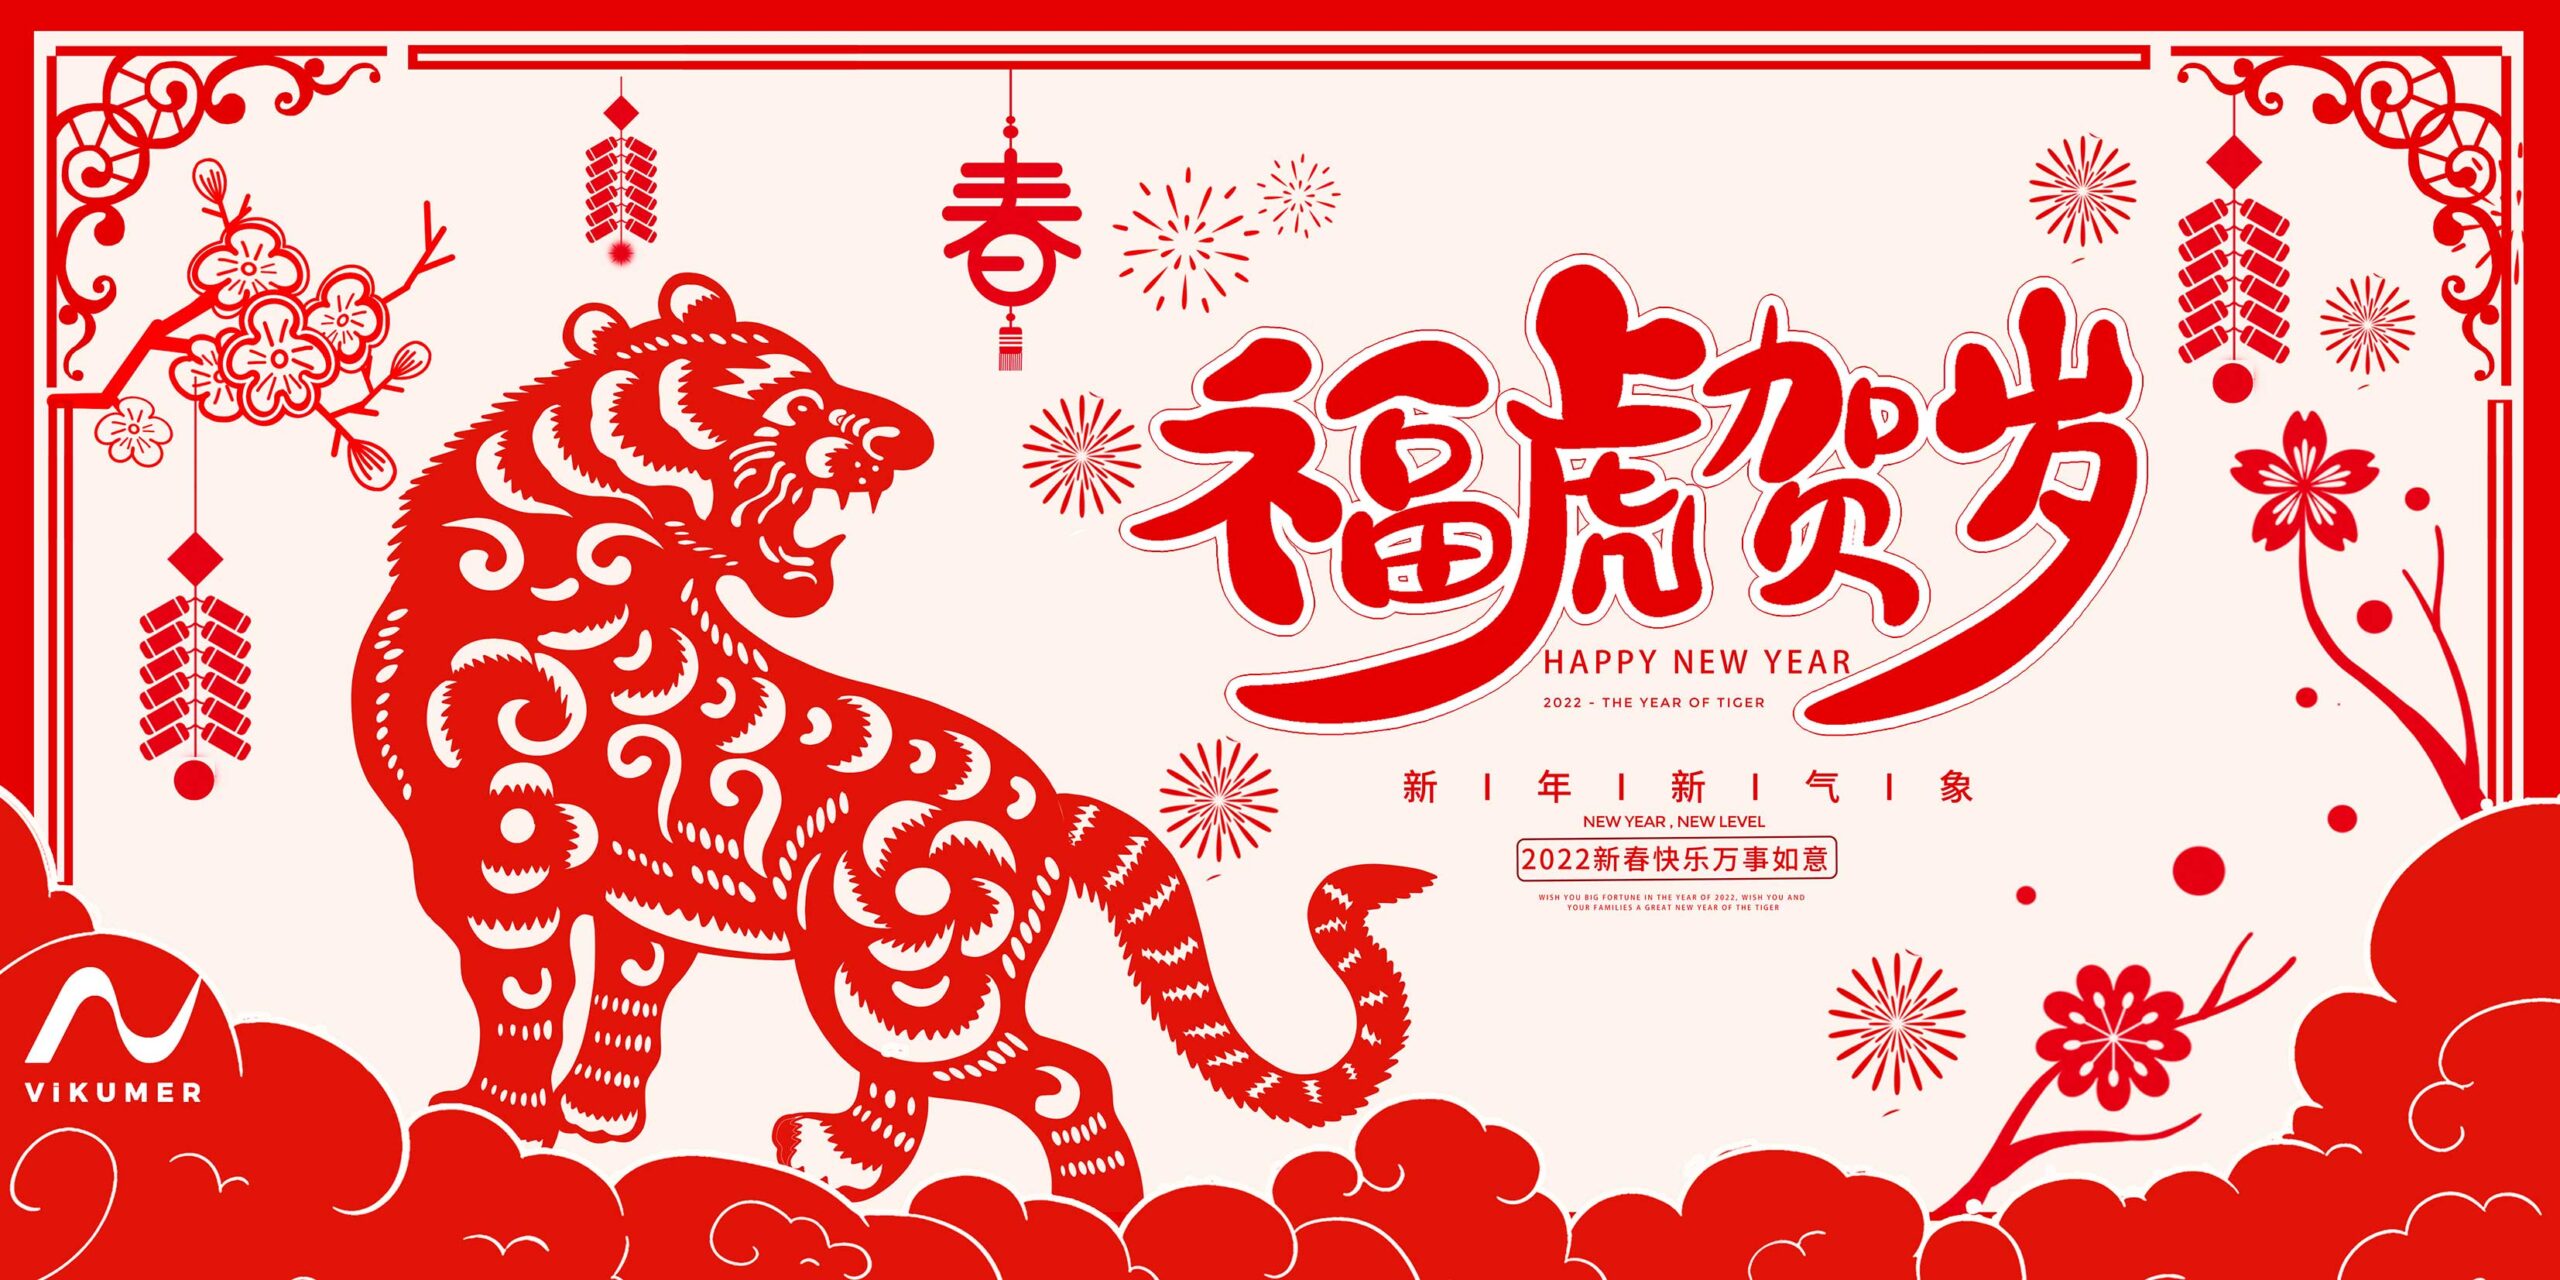 Happy New Year 2022 - The Year Of Tiger